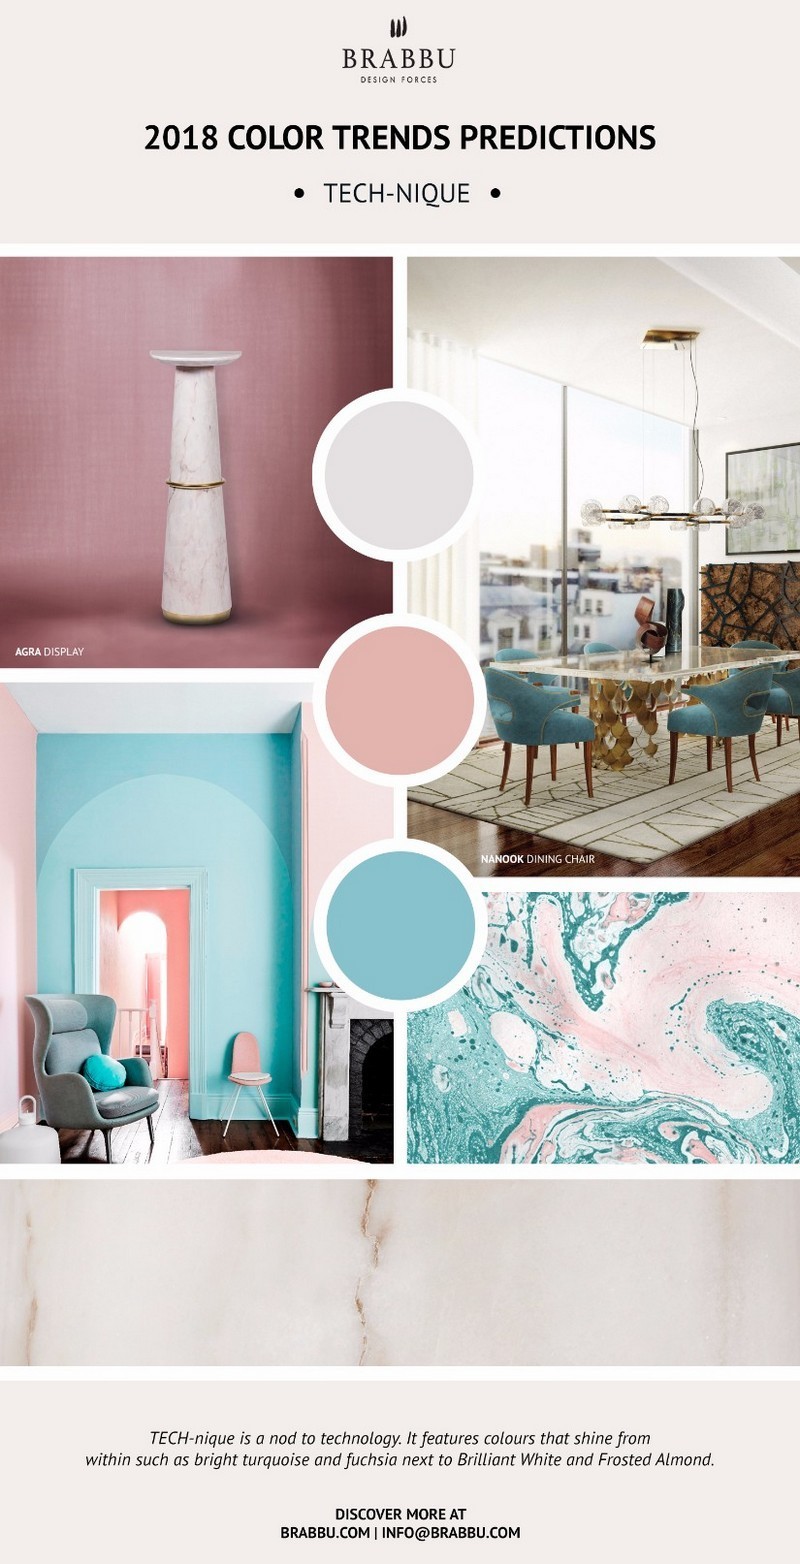 Awesome Mood Boards Following Pantone 2018 Color Trends - Pantone Mood Boards - Pantone Color of the Year 2018 - Trend Forecasting - Design Build Ideas